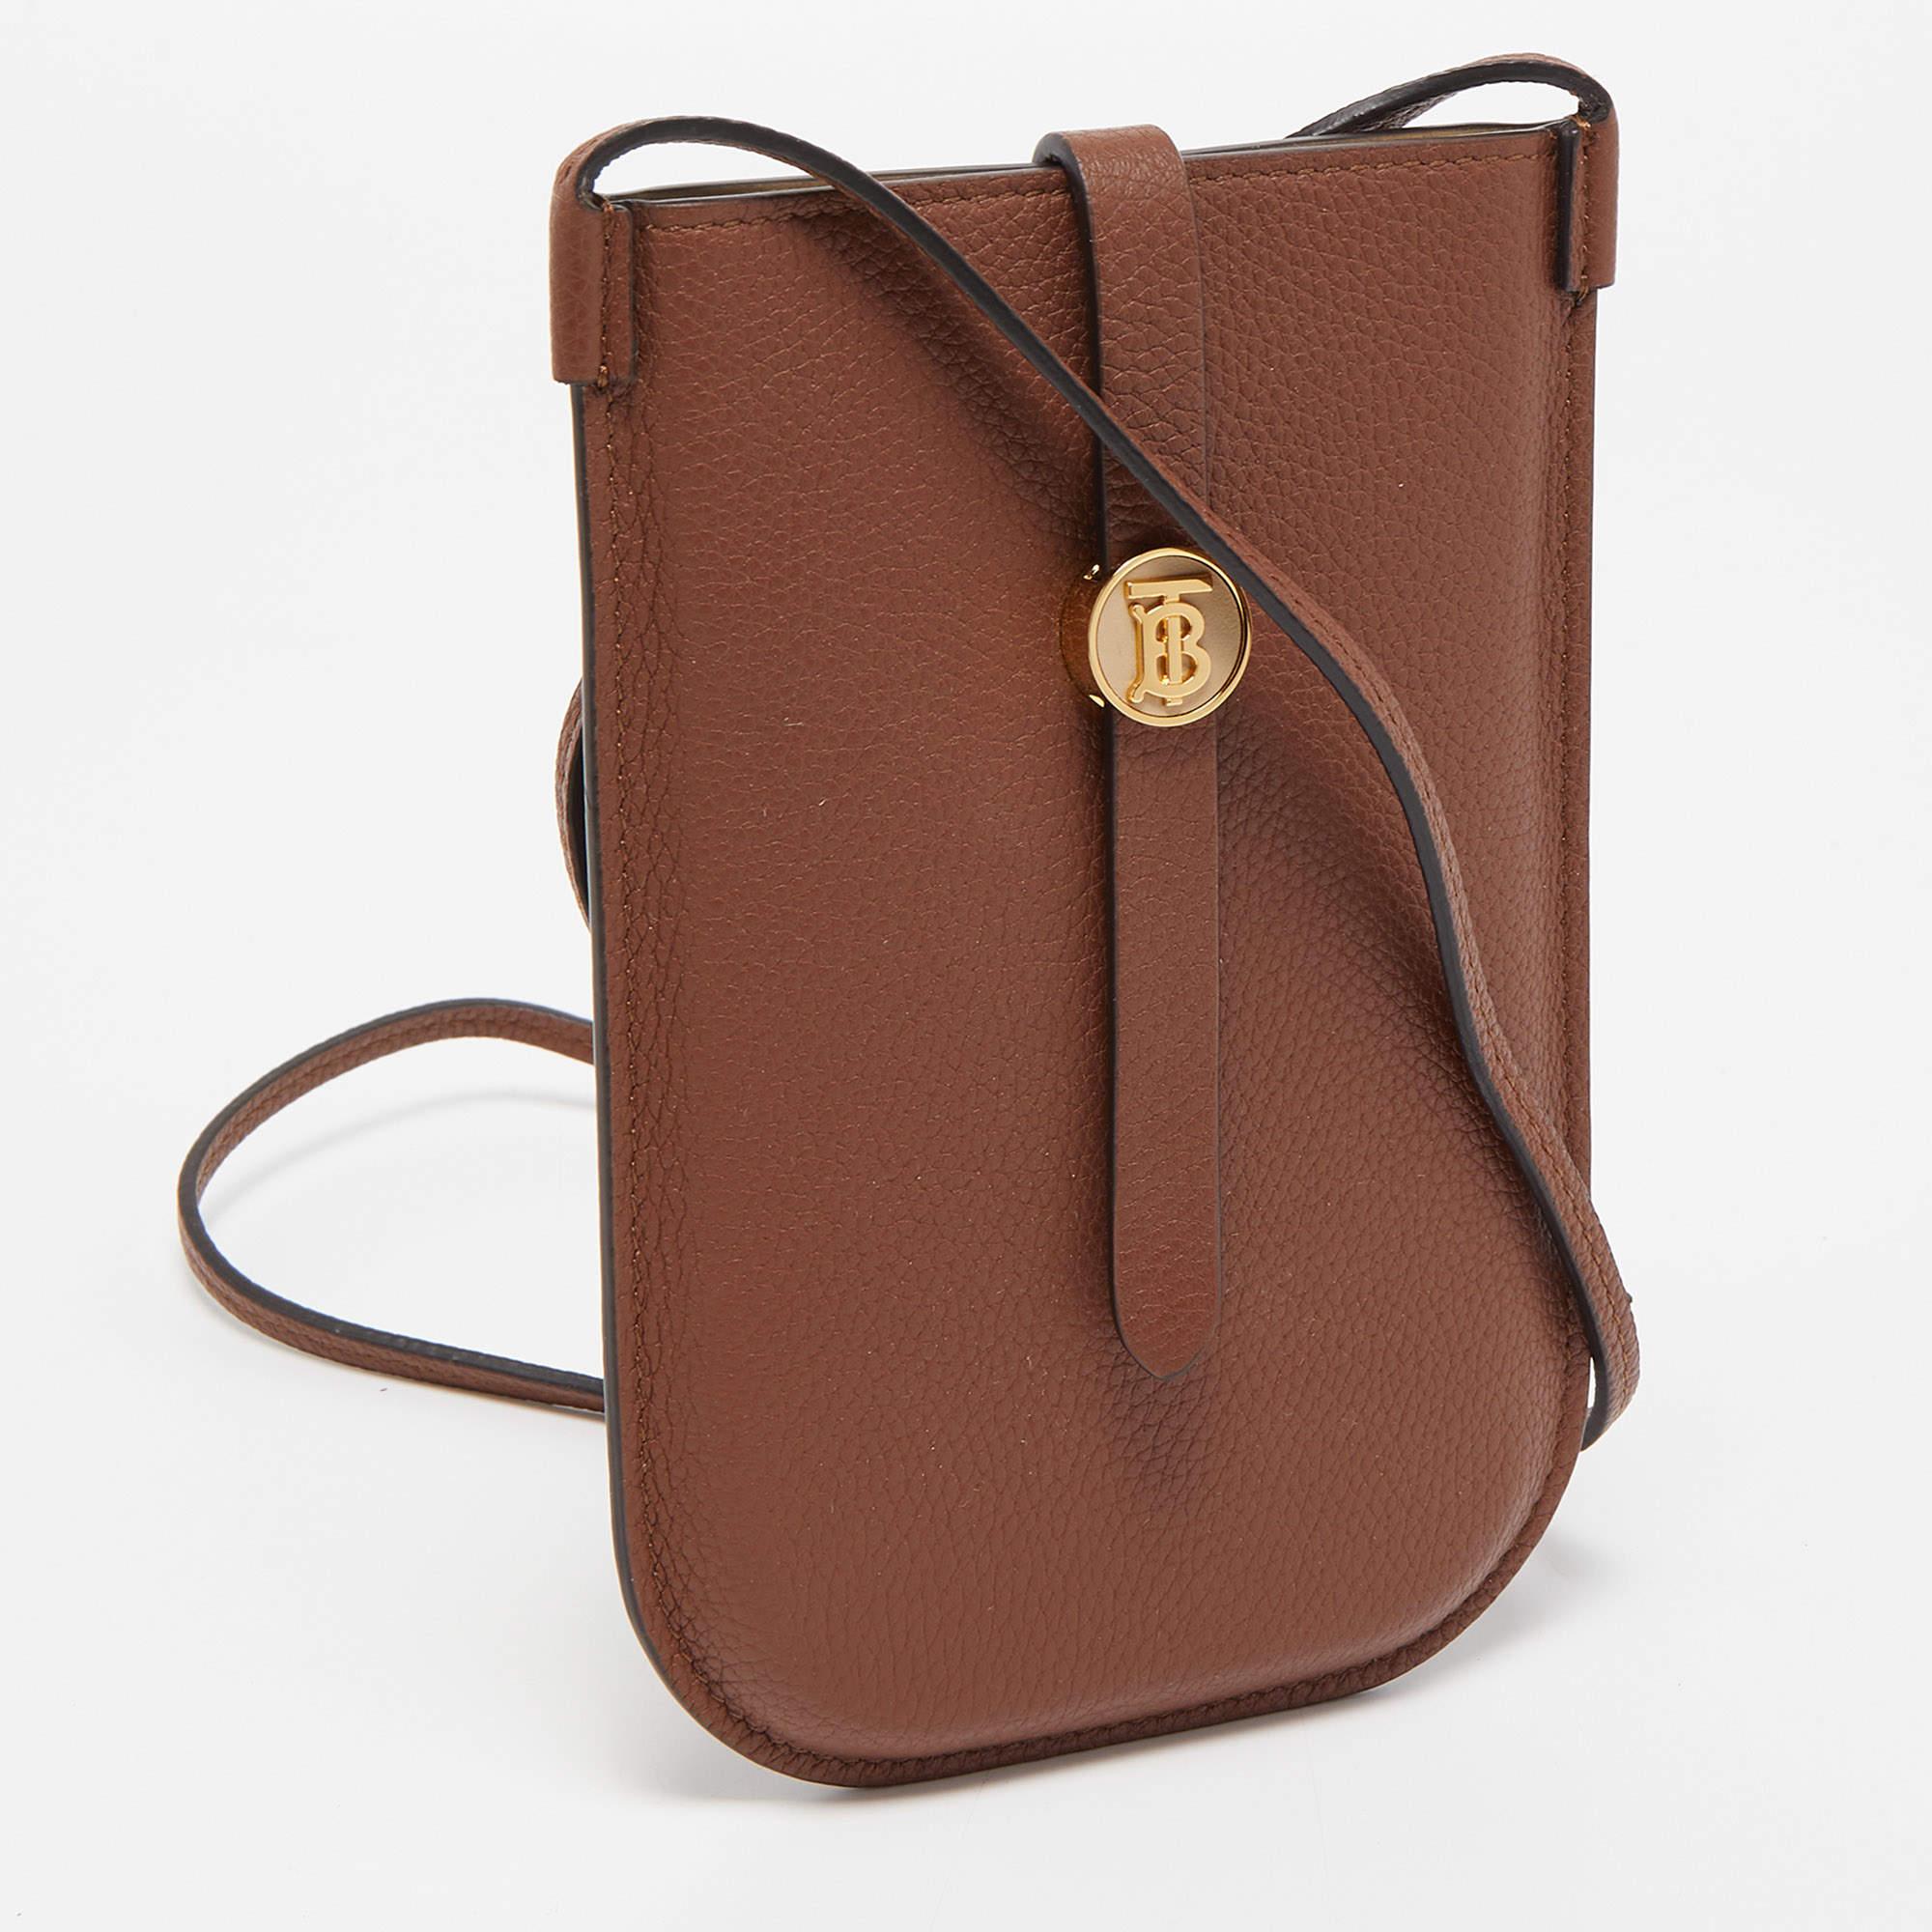 Burberry Brown Leather Anne Phone Pouch with Strap 2